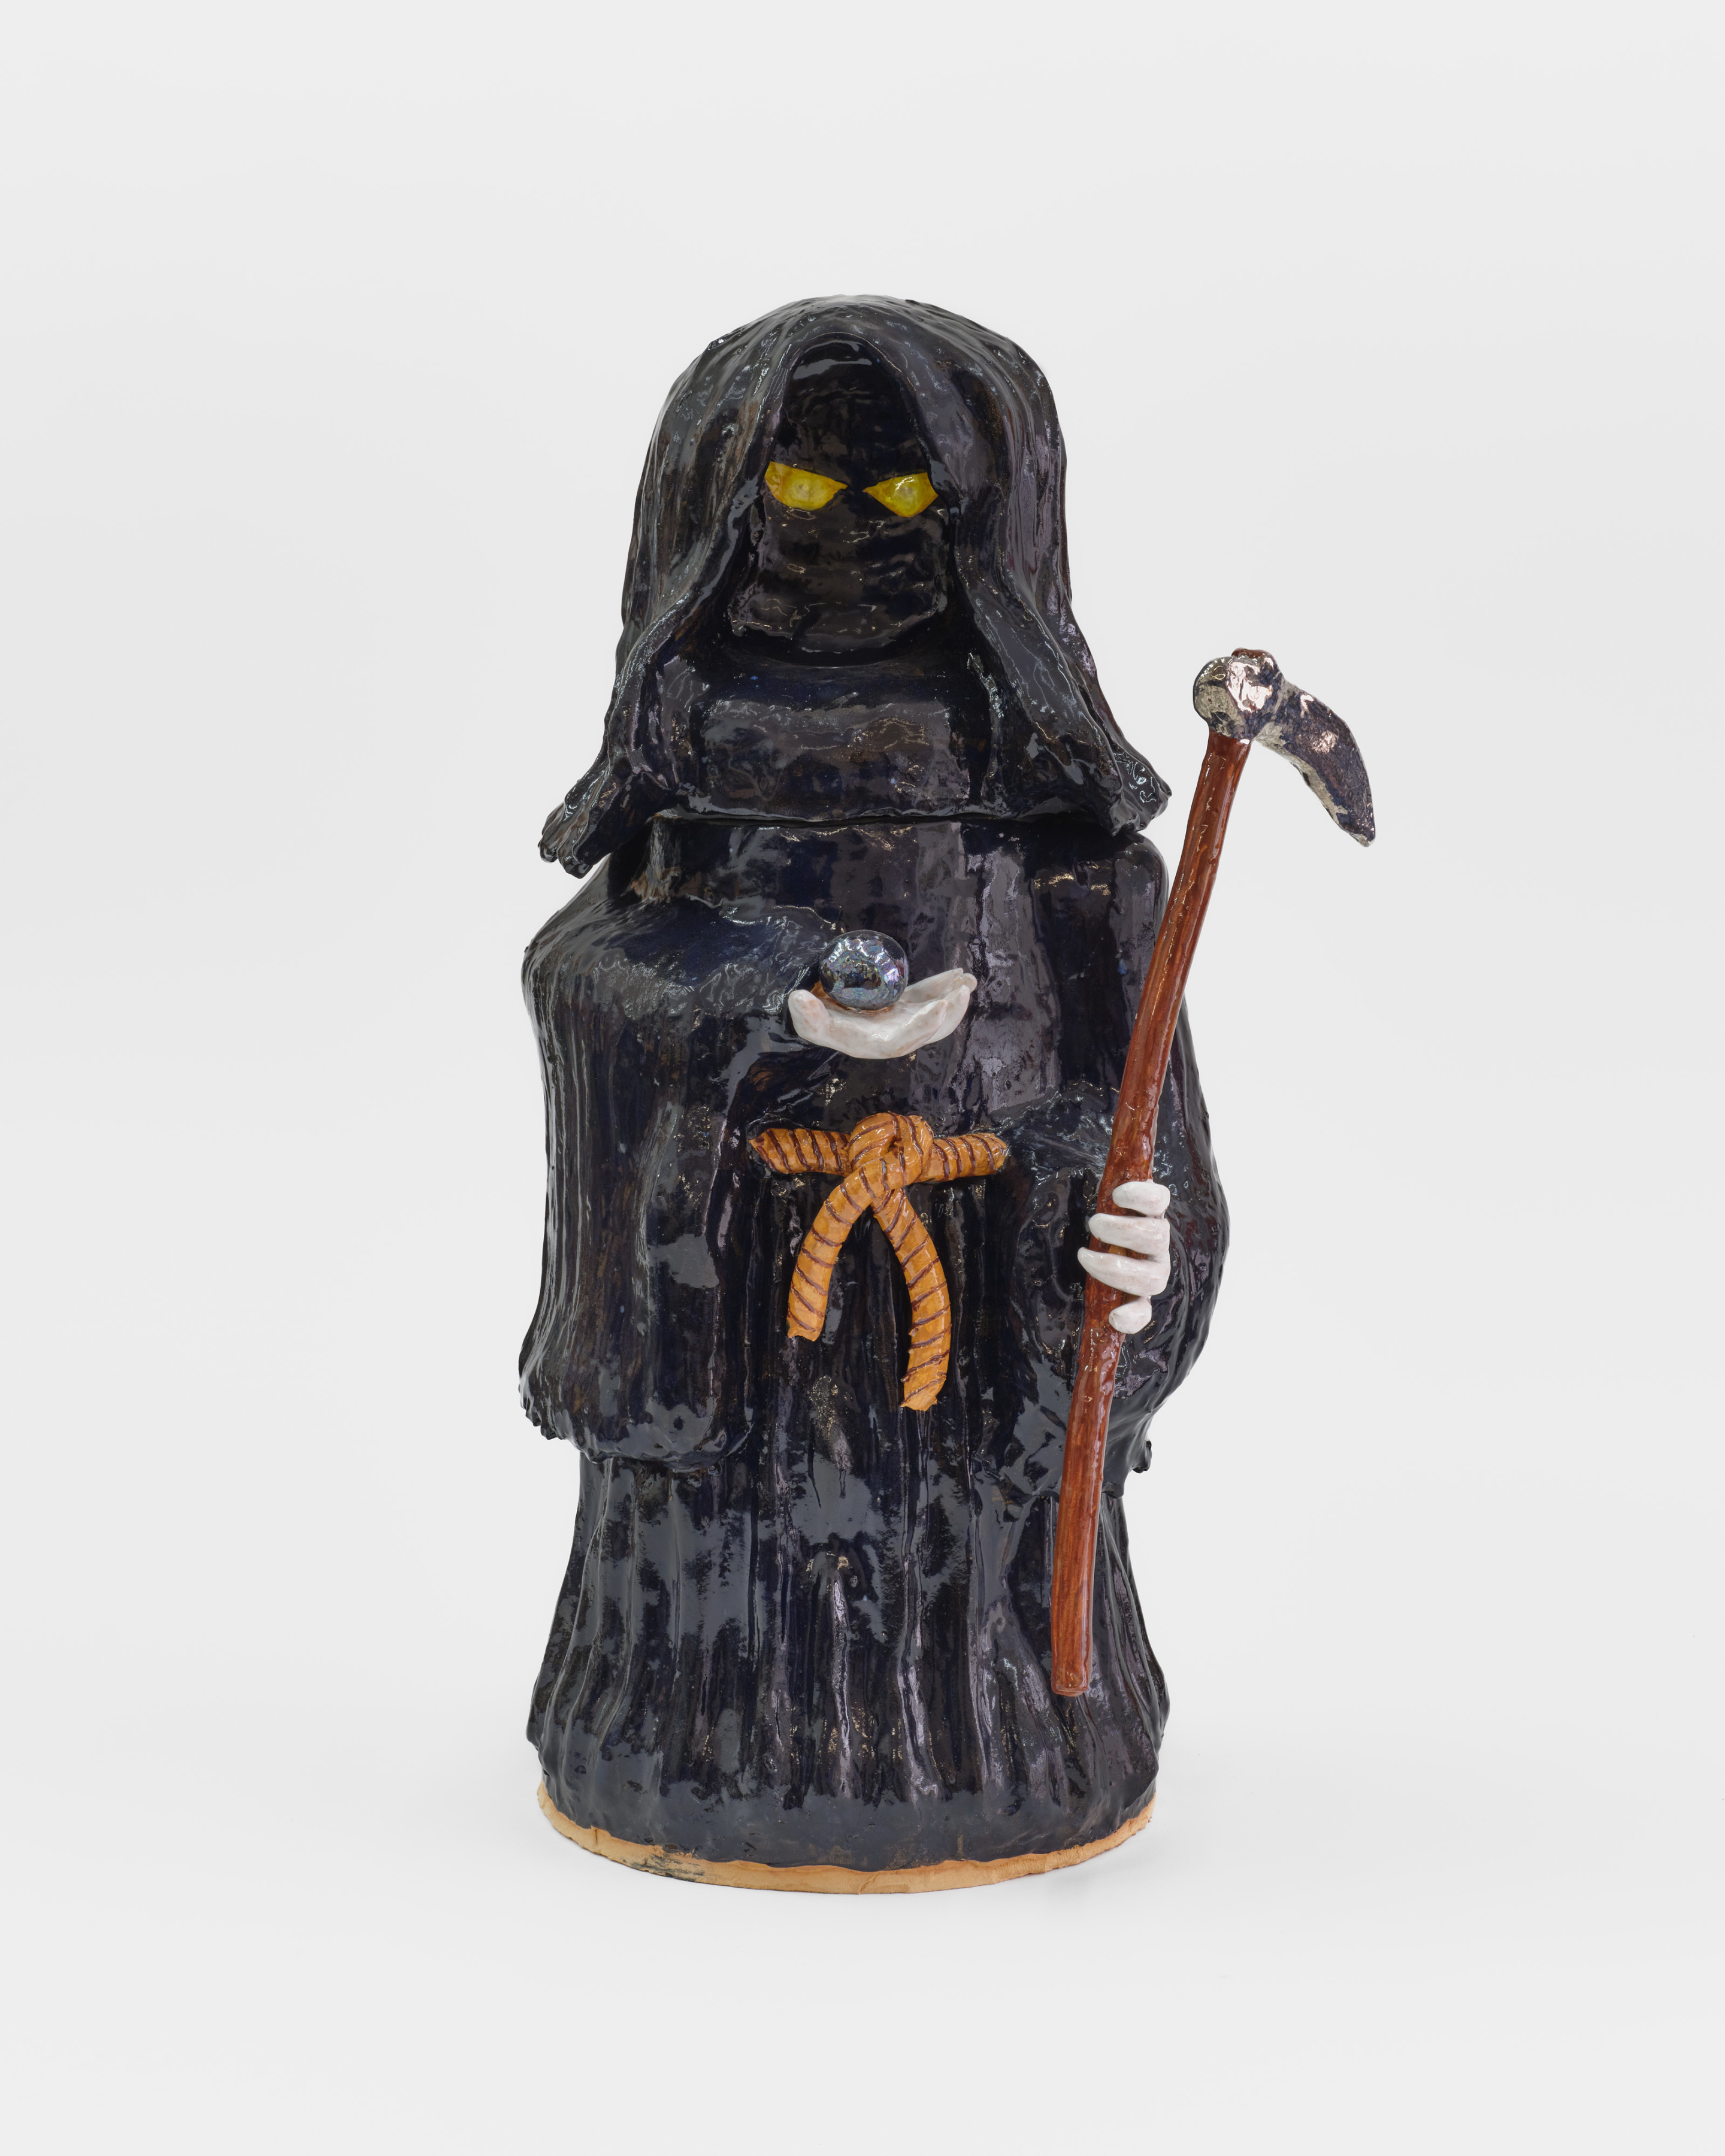 A ceramic sculpture of a black cloaked figure carrying a scythe and holding a shining stone. 